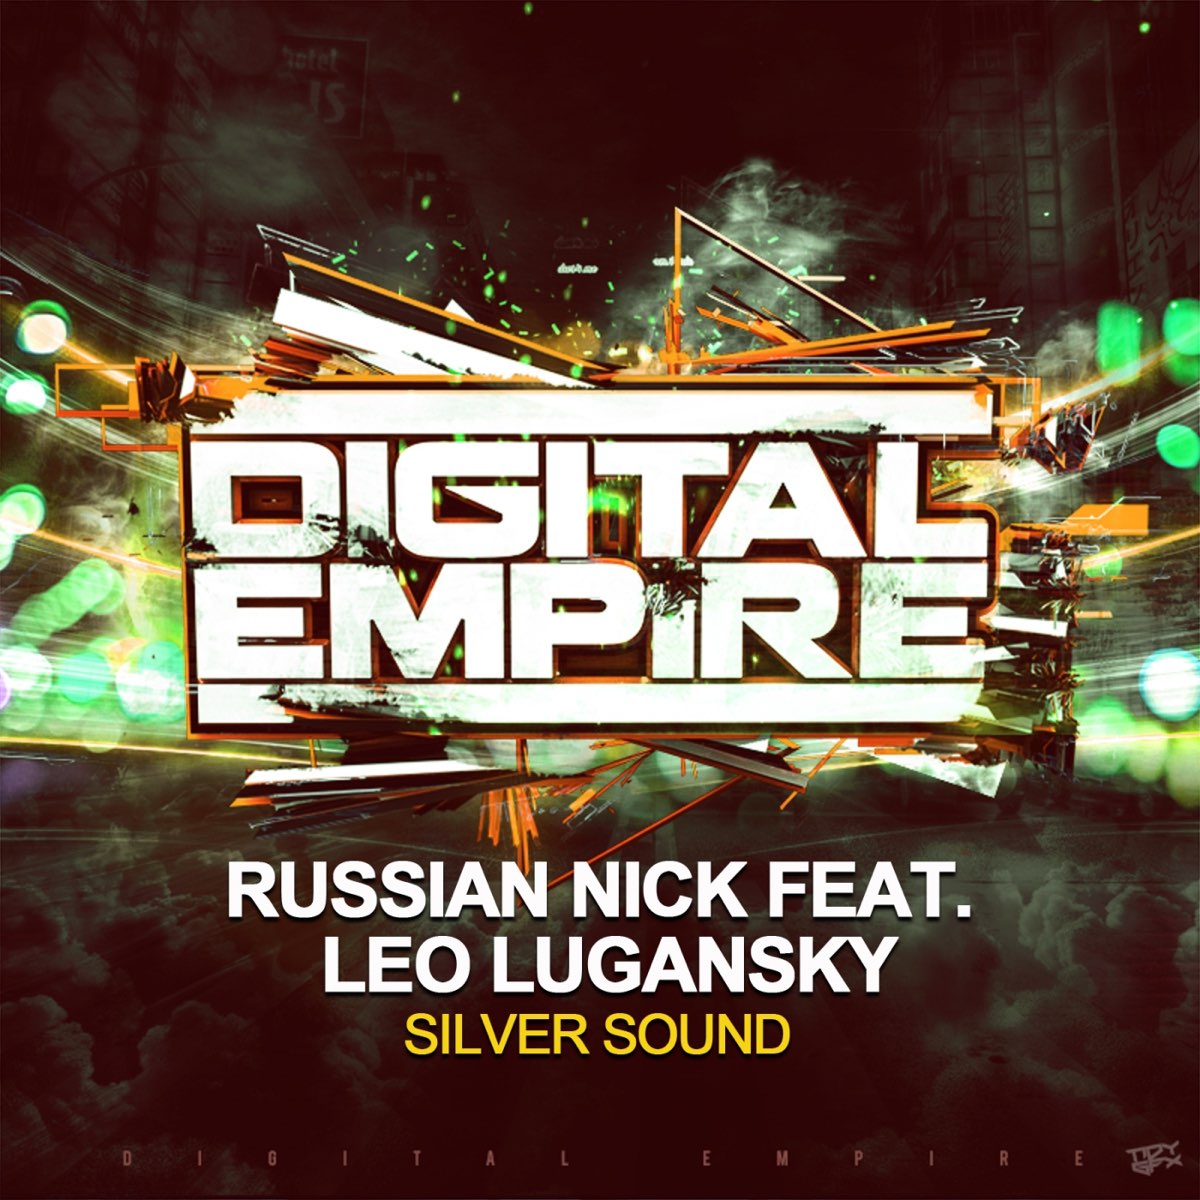 Nick russian. Sound of Silver. Russian Sounds. Nick on Russian.